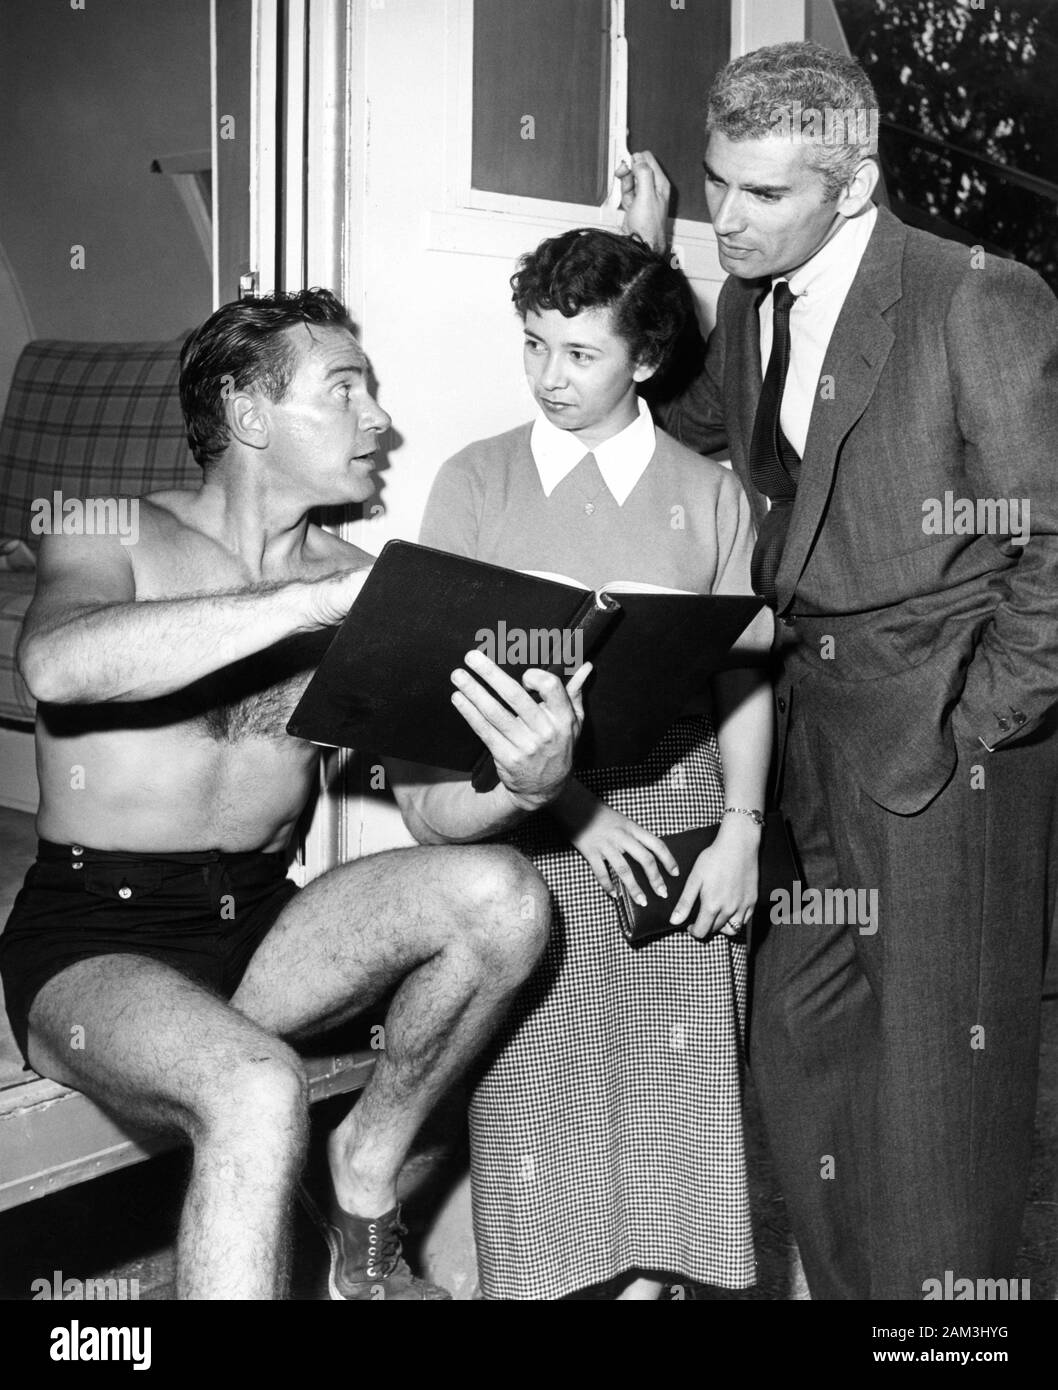 RICHARD CARLSON in his trailer dressing room on the Universal Backlot visited by JEFF CHANDLER and one of his fans during filming of  CREATURE FROM THE BLACK LAGOON 1954 director JACK ARNOLD filmed in 3D producer William Alland Universal International Pictures (UI) Stock Photo